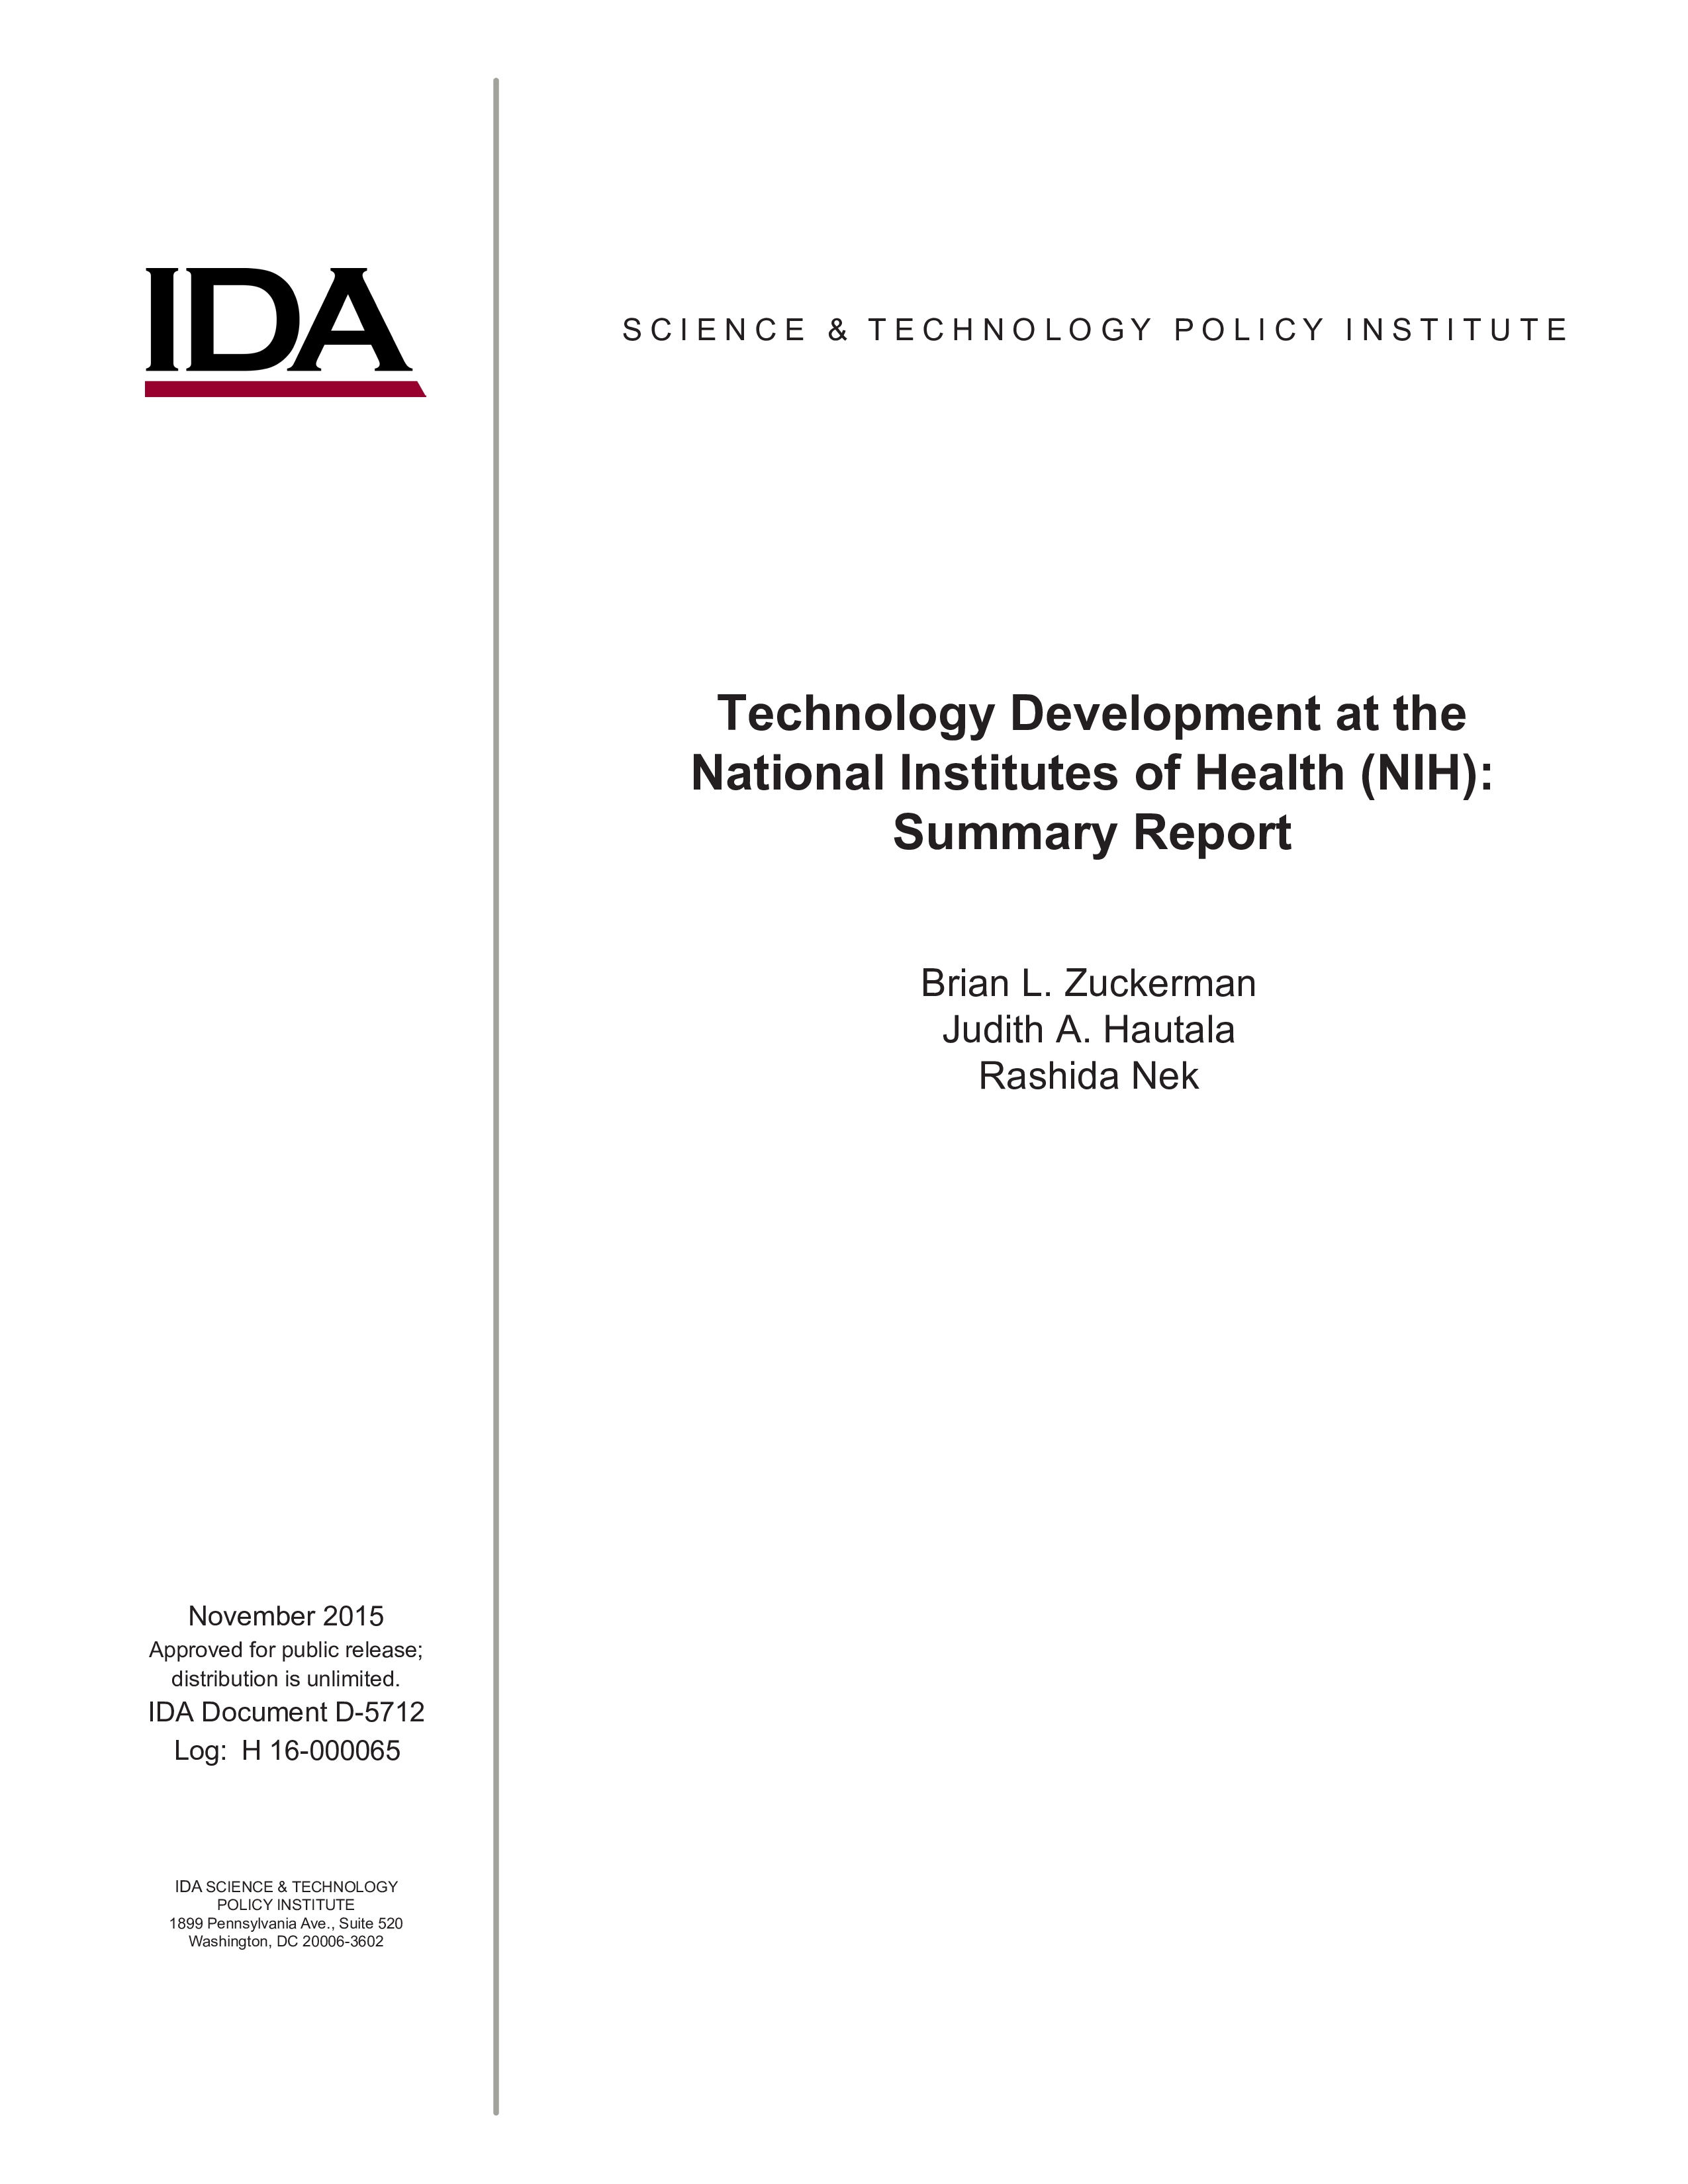 Technology Development at the National Institute of Health (NIH): Summary Report